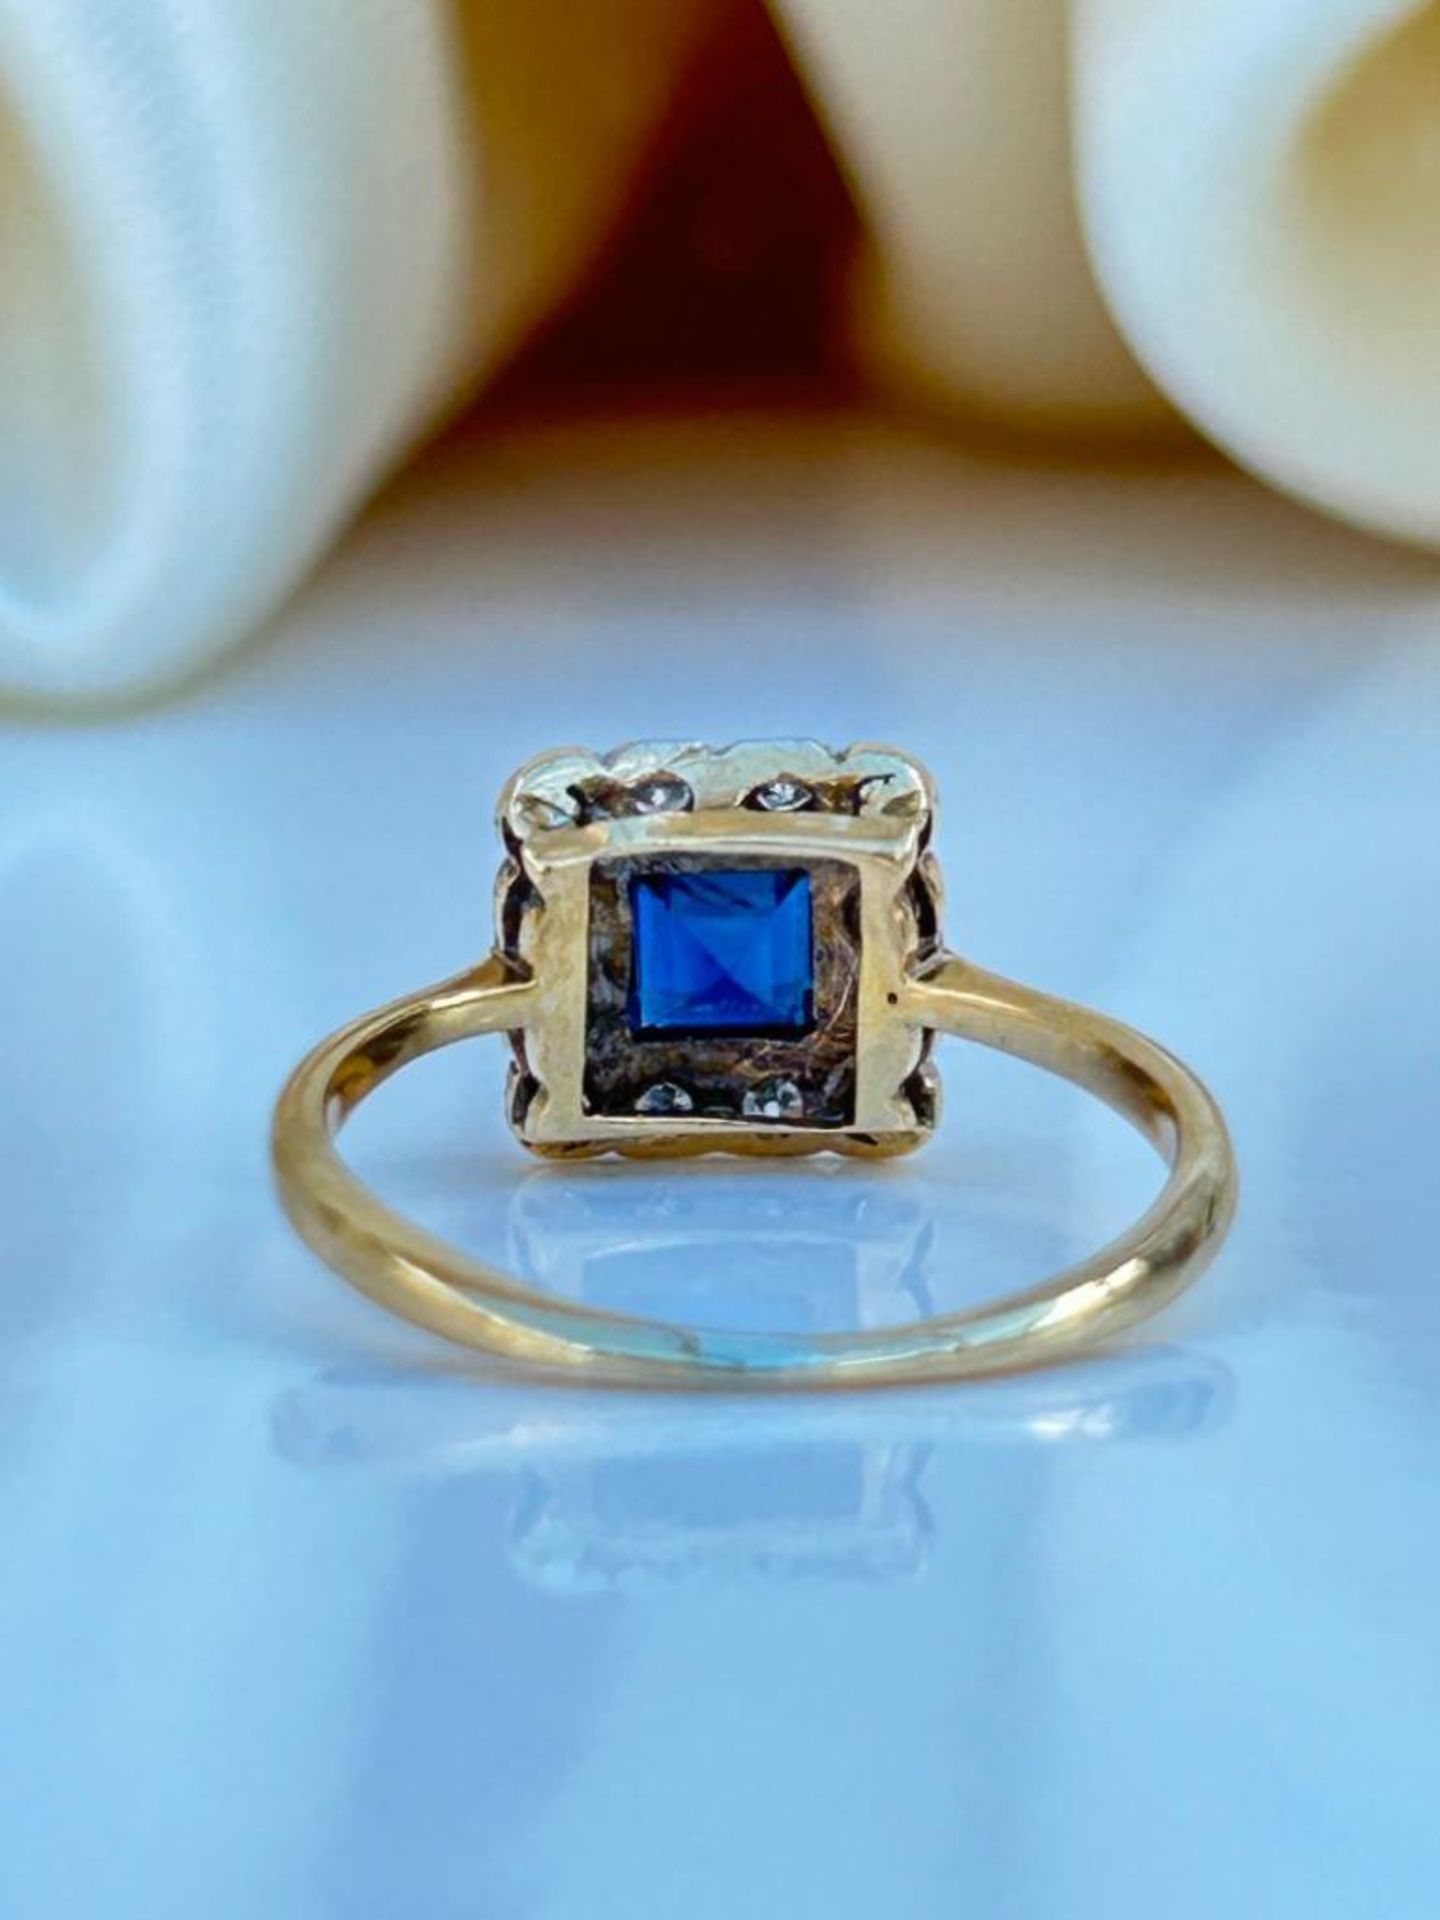 Sweet Antique Sapphire and Diamond Square Ring in 18ct Yellow Gold - Image 6 of 6